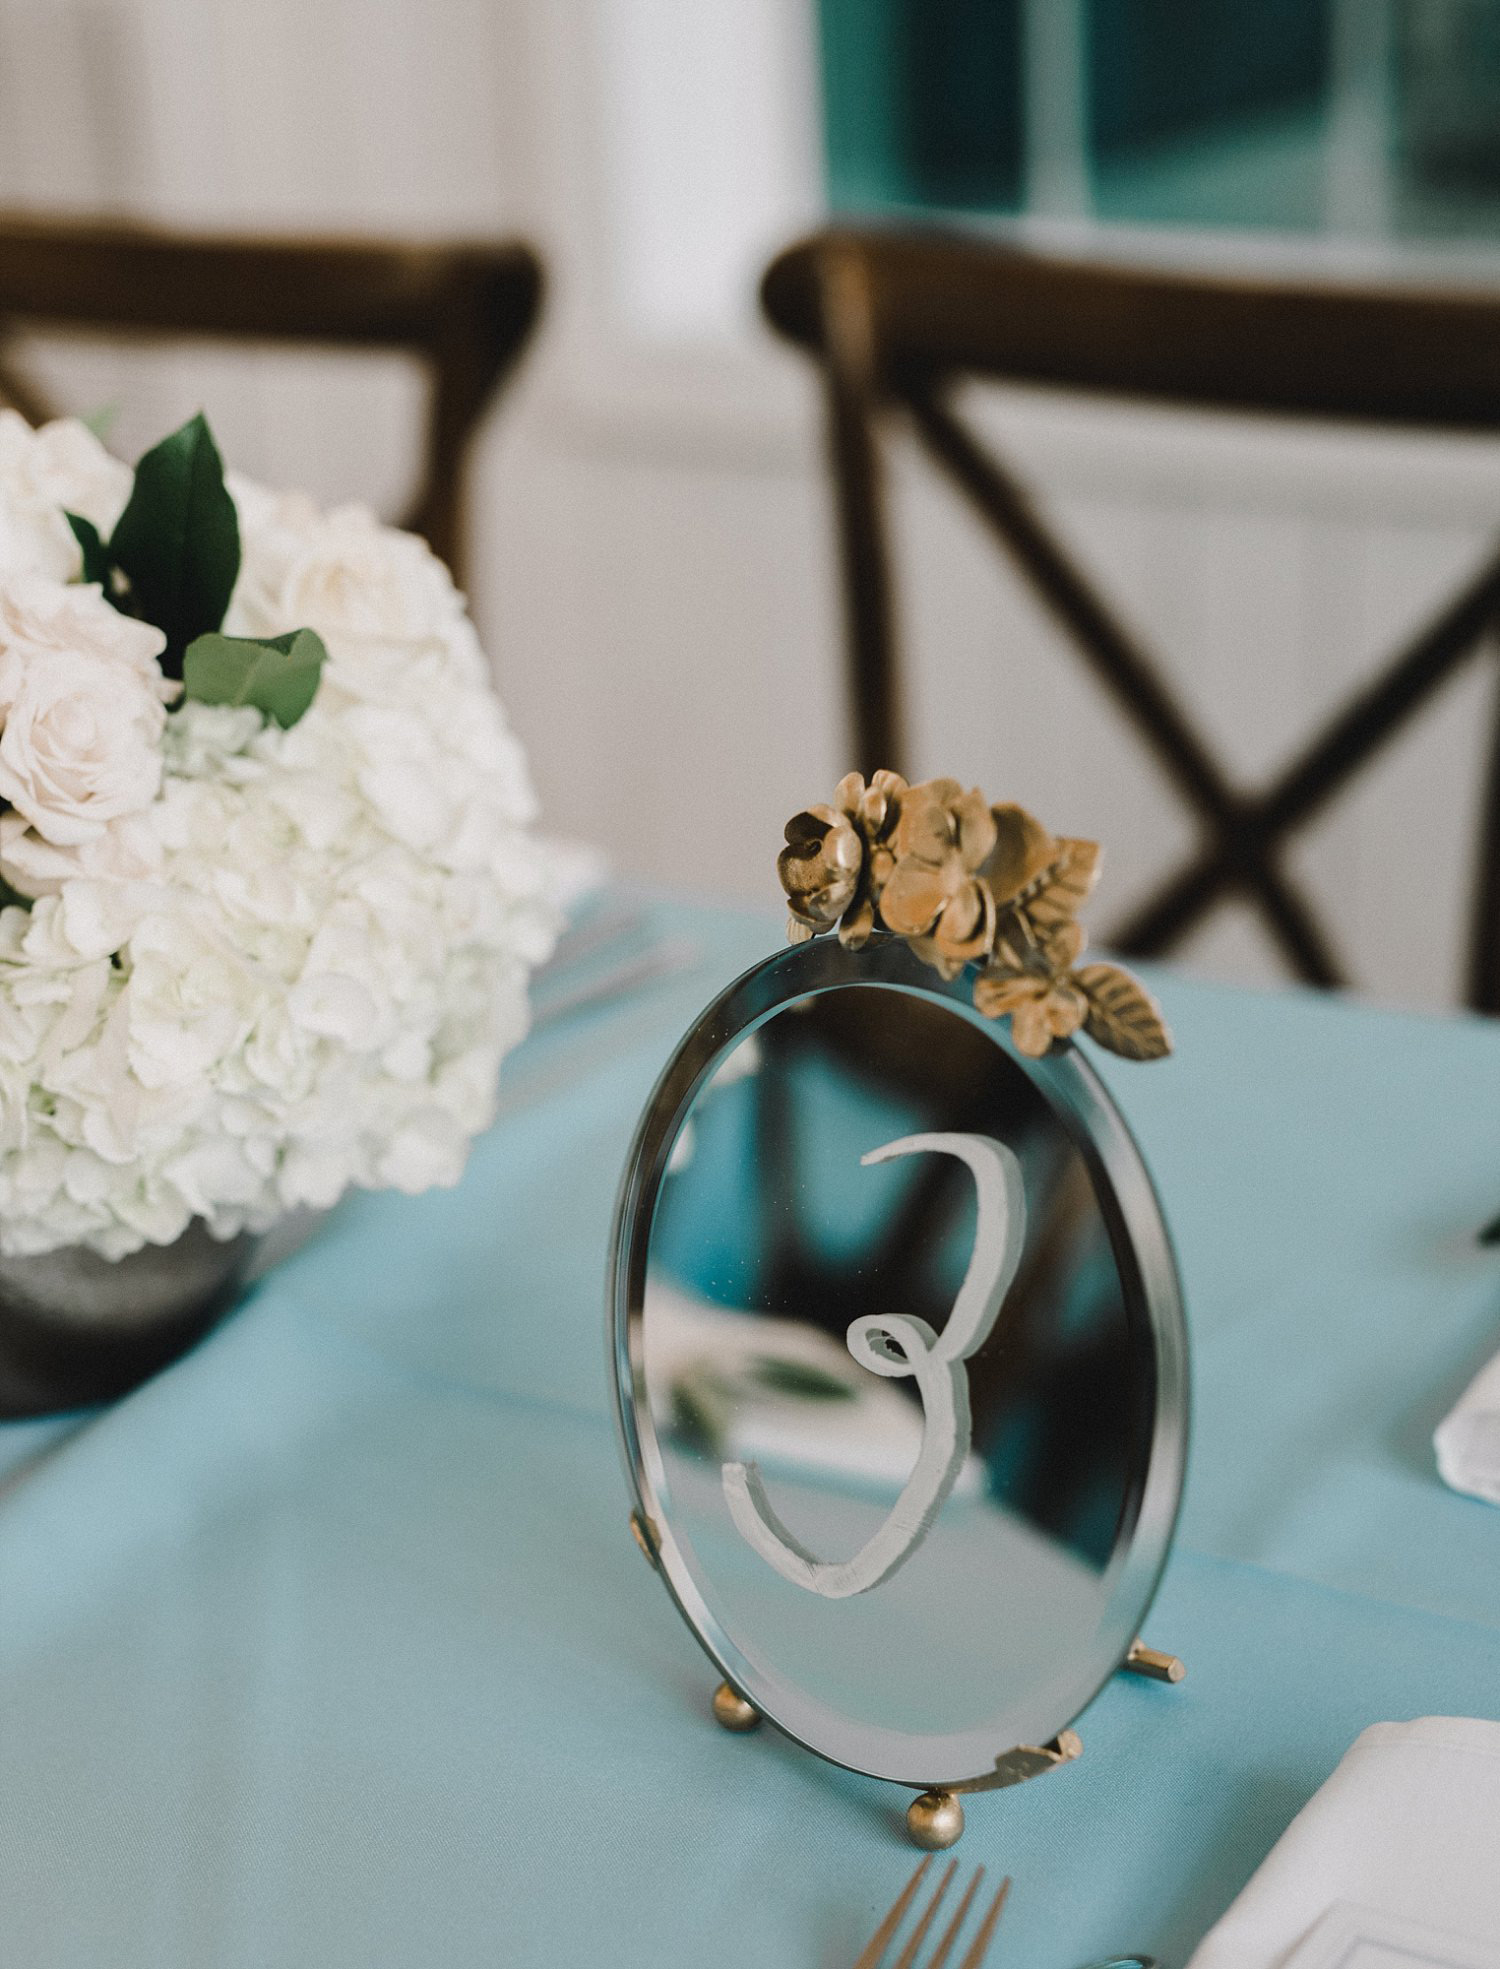 Vintage gold mirror table number for White Sparrow Barn wedding